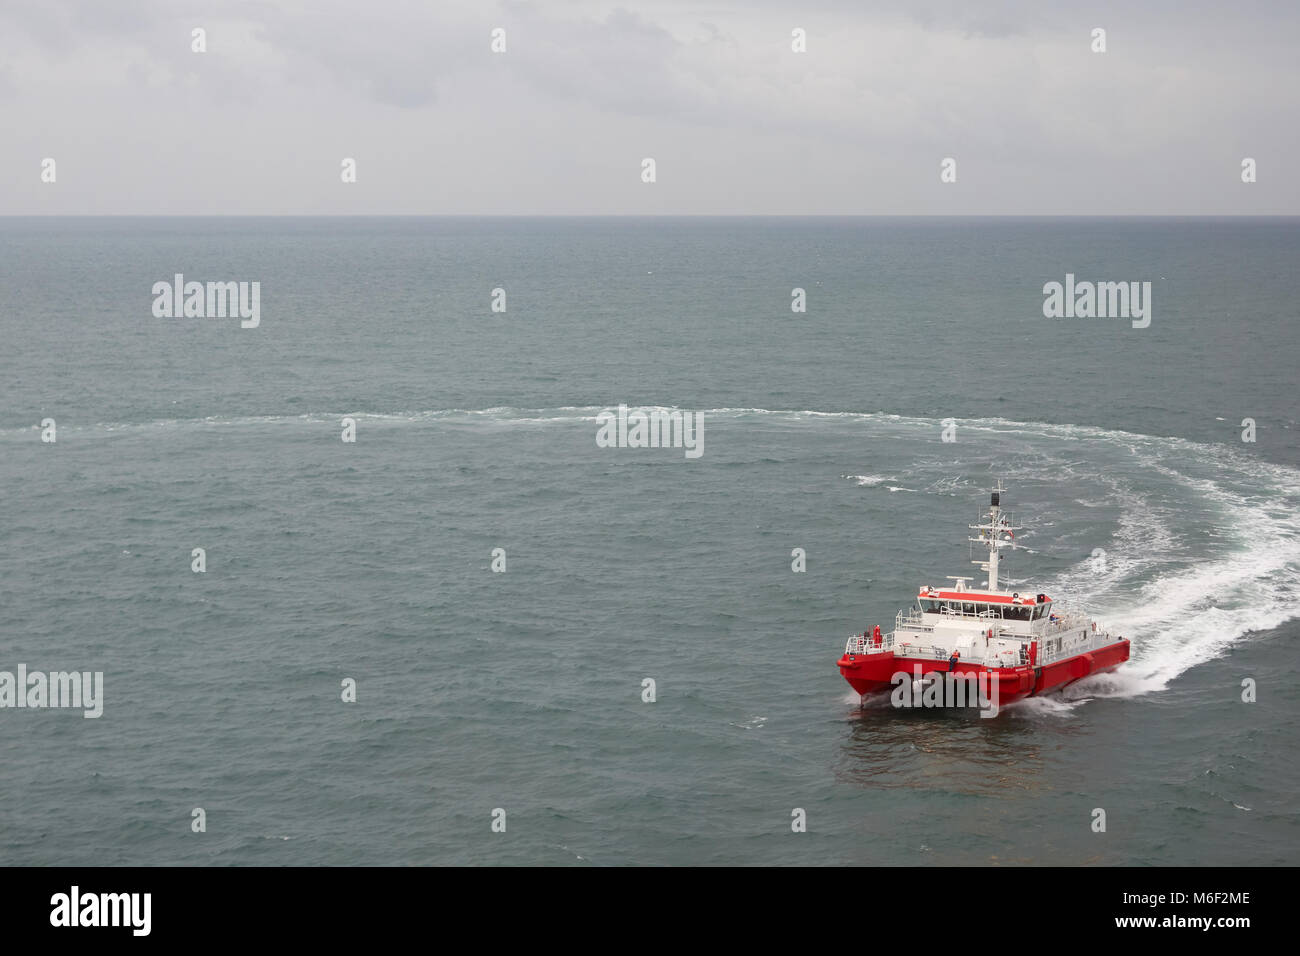 Modern tugboat of red and white color in the sea. Stock Photo